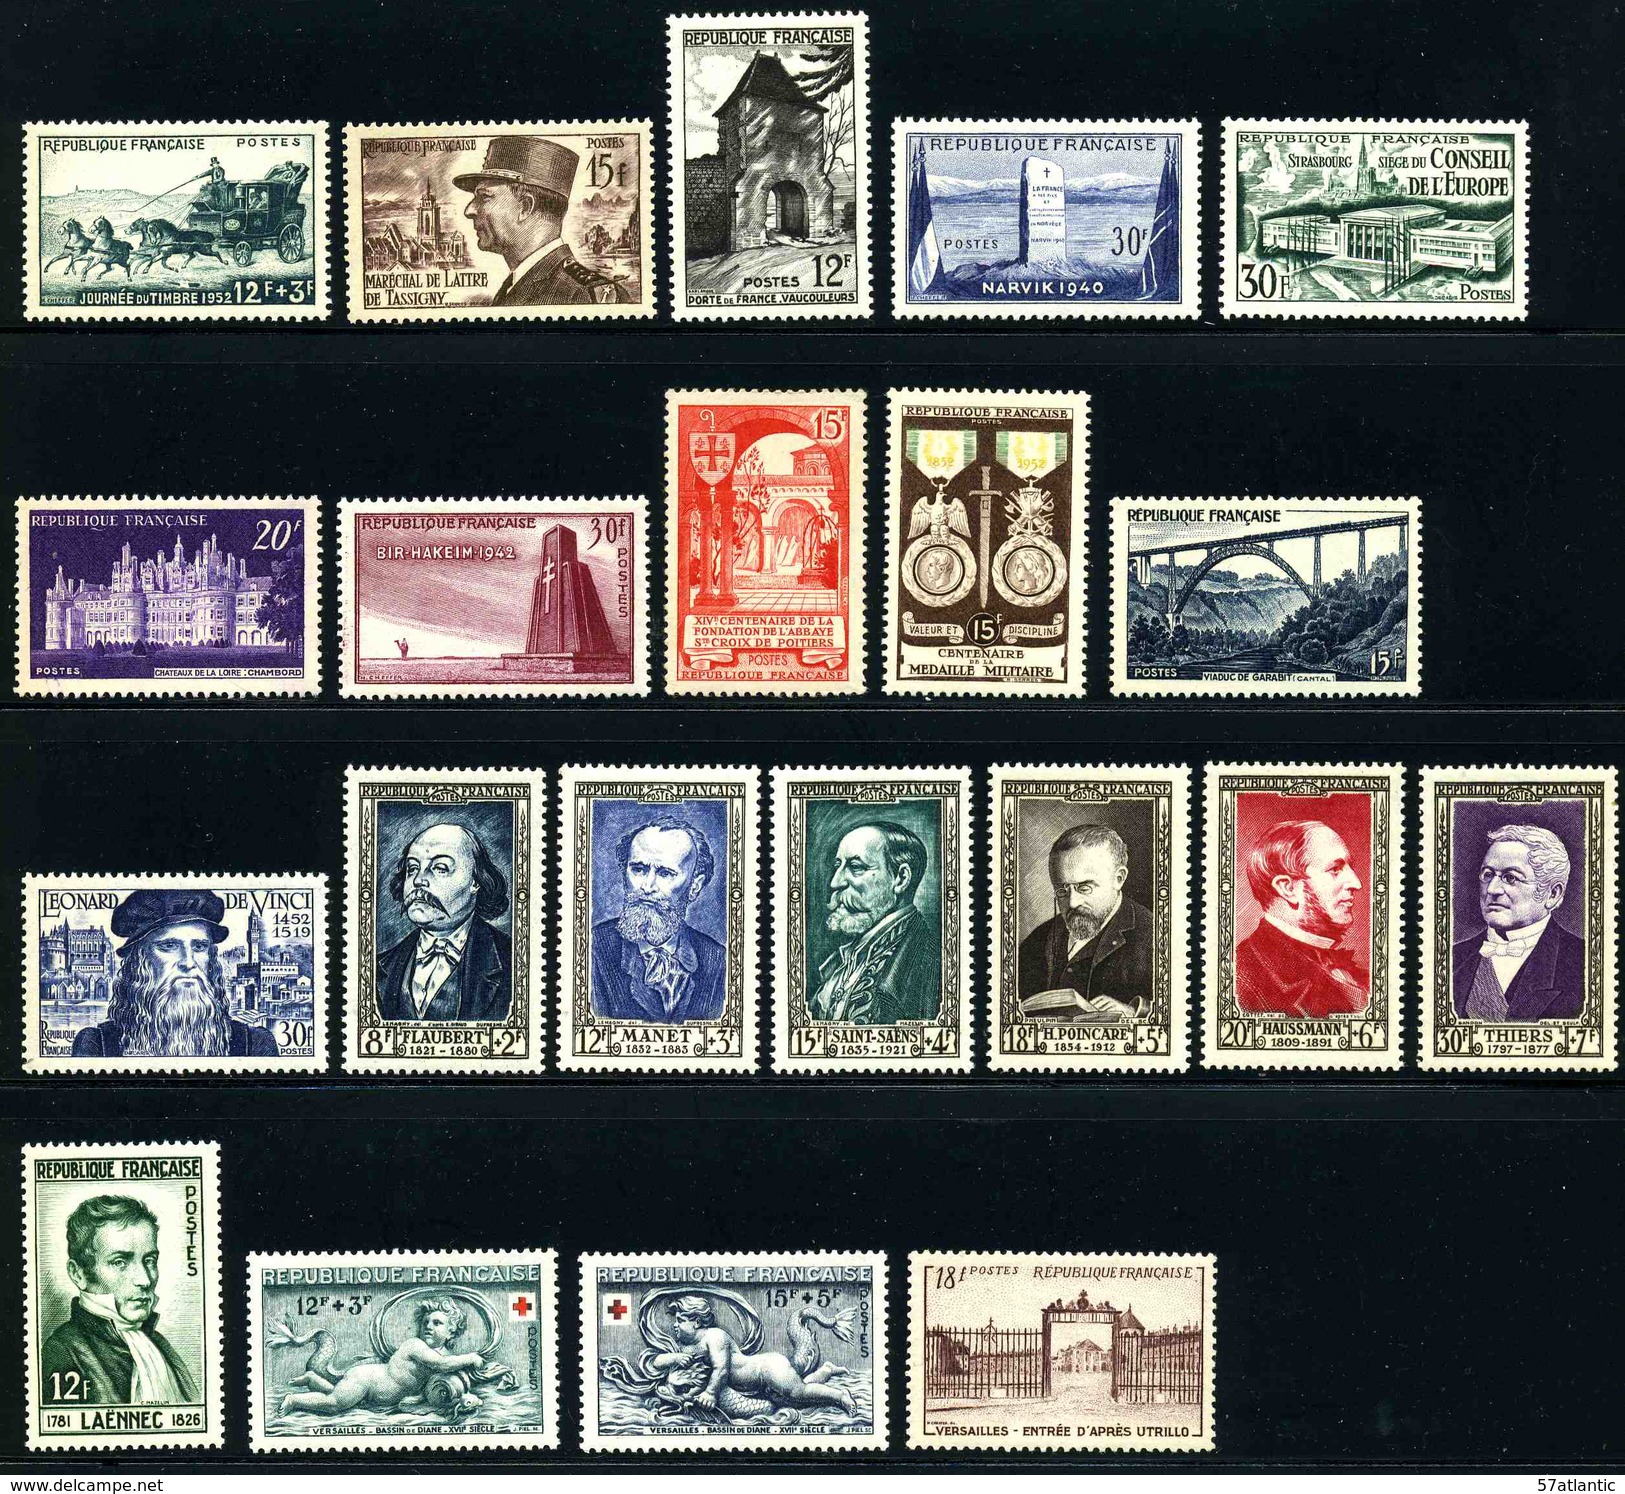 FRANCE - ANNEE COMPLETE 1952 - YT 919 à 939 ** - 21 TIMBRES NEUFS ** - 1950-1959